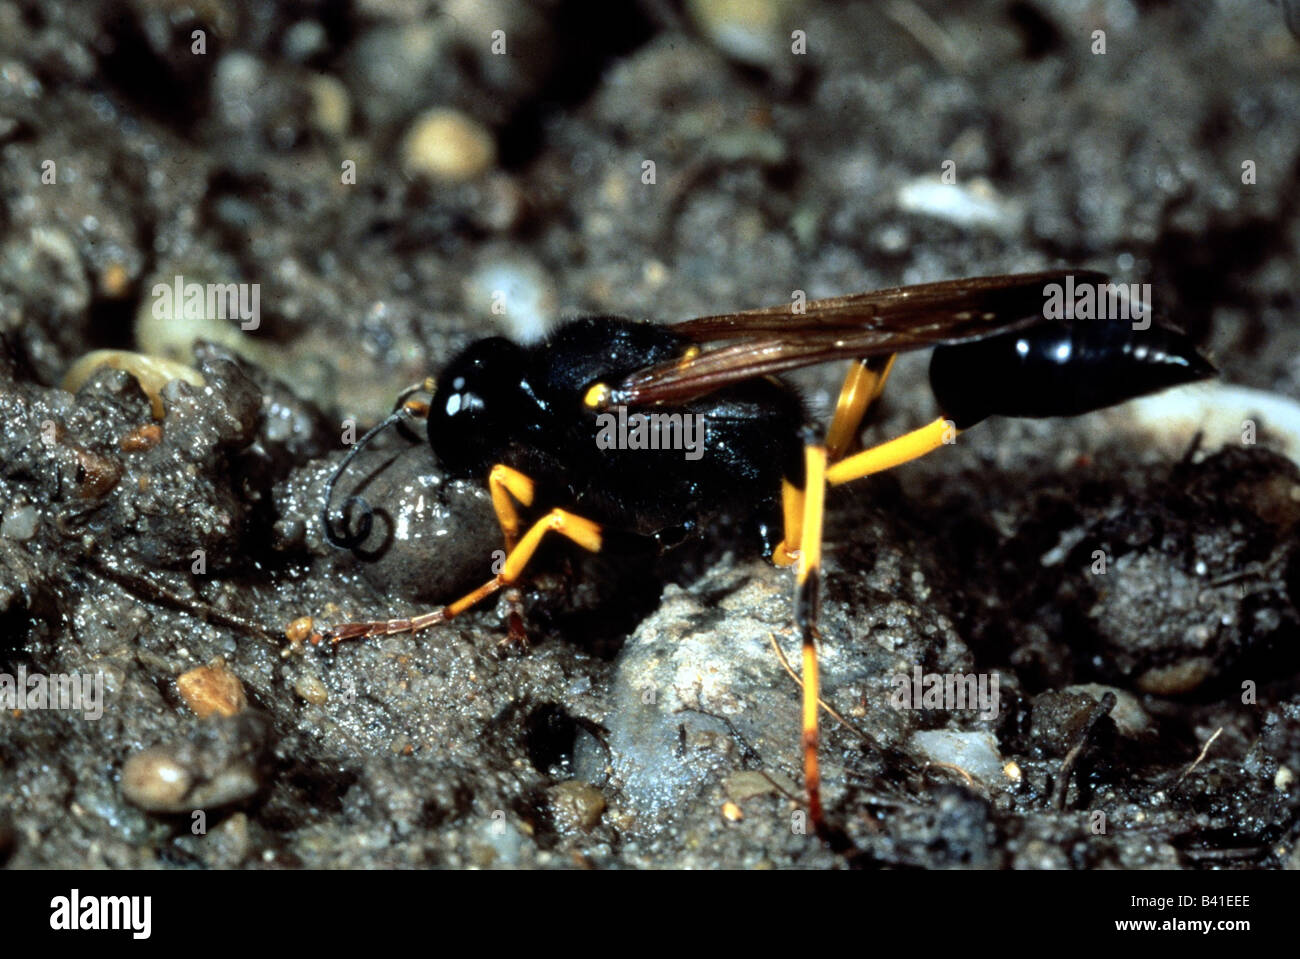 zoology / animals, insects, wasps, Scolia flavifrons, on stones, distribution: Southern Europe, wasp, insect, animal, Stock Photo